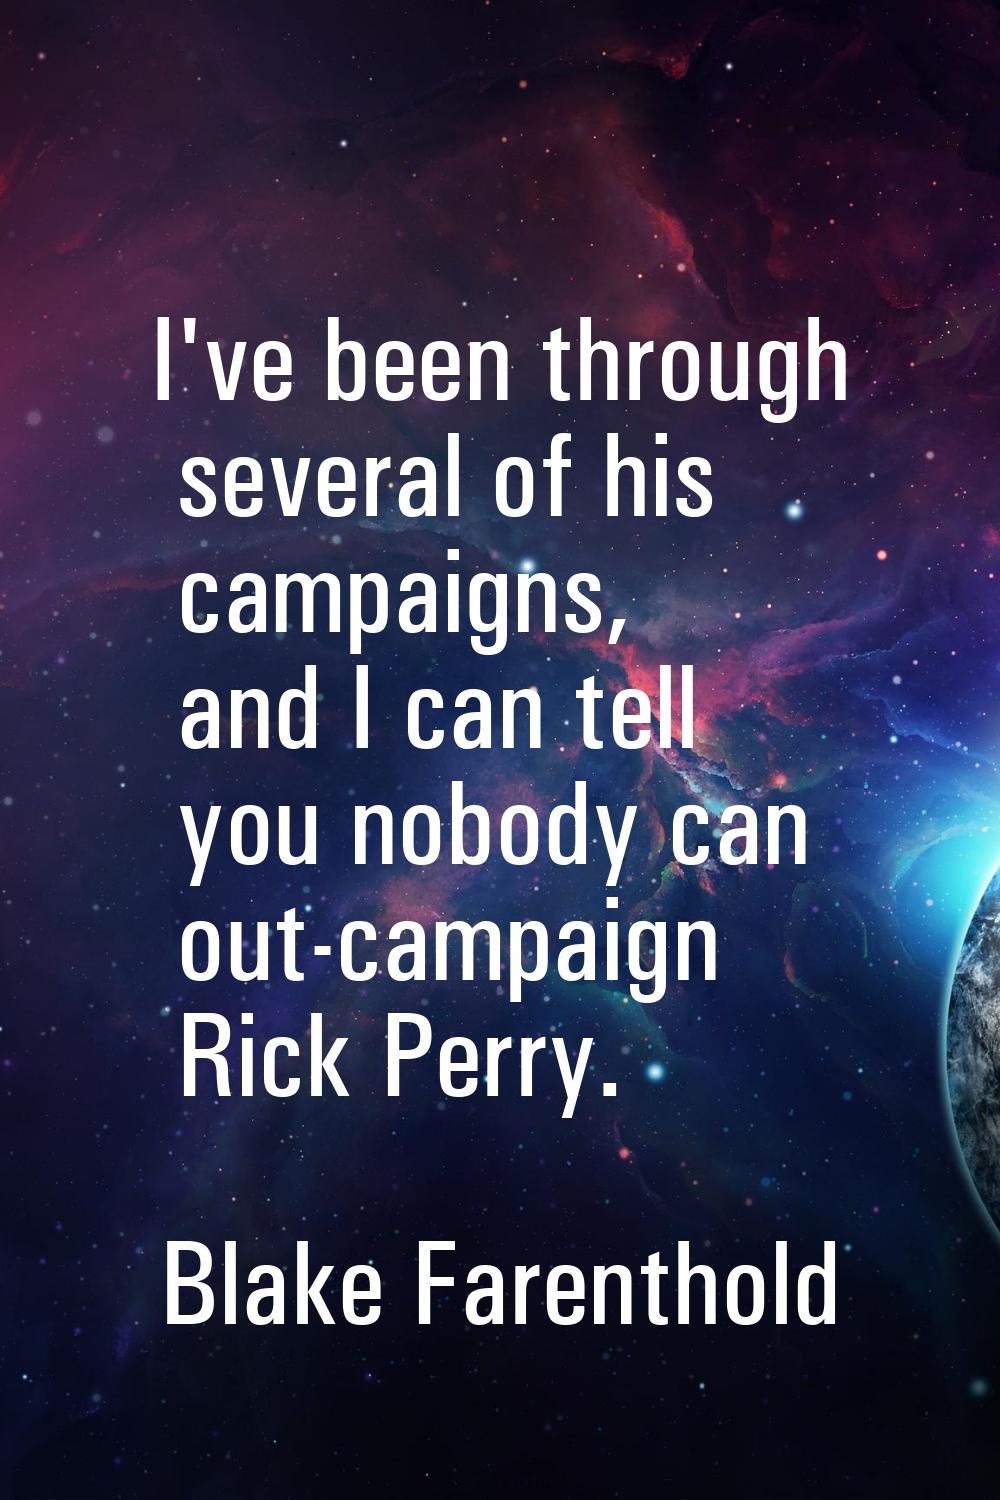 I've been through several of his campaigns, and I can tell you nobody can out-campaign Rick Perry.